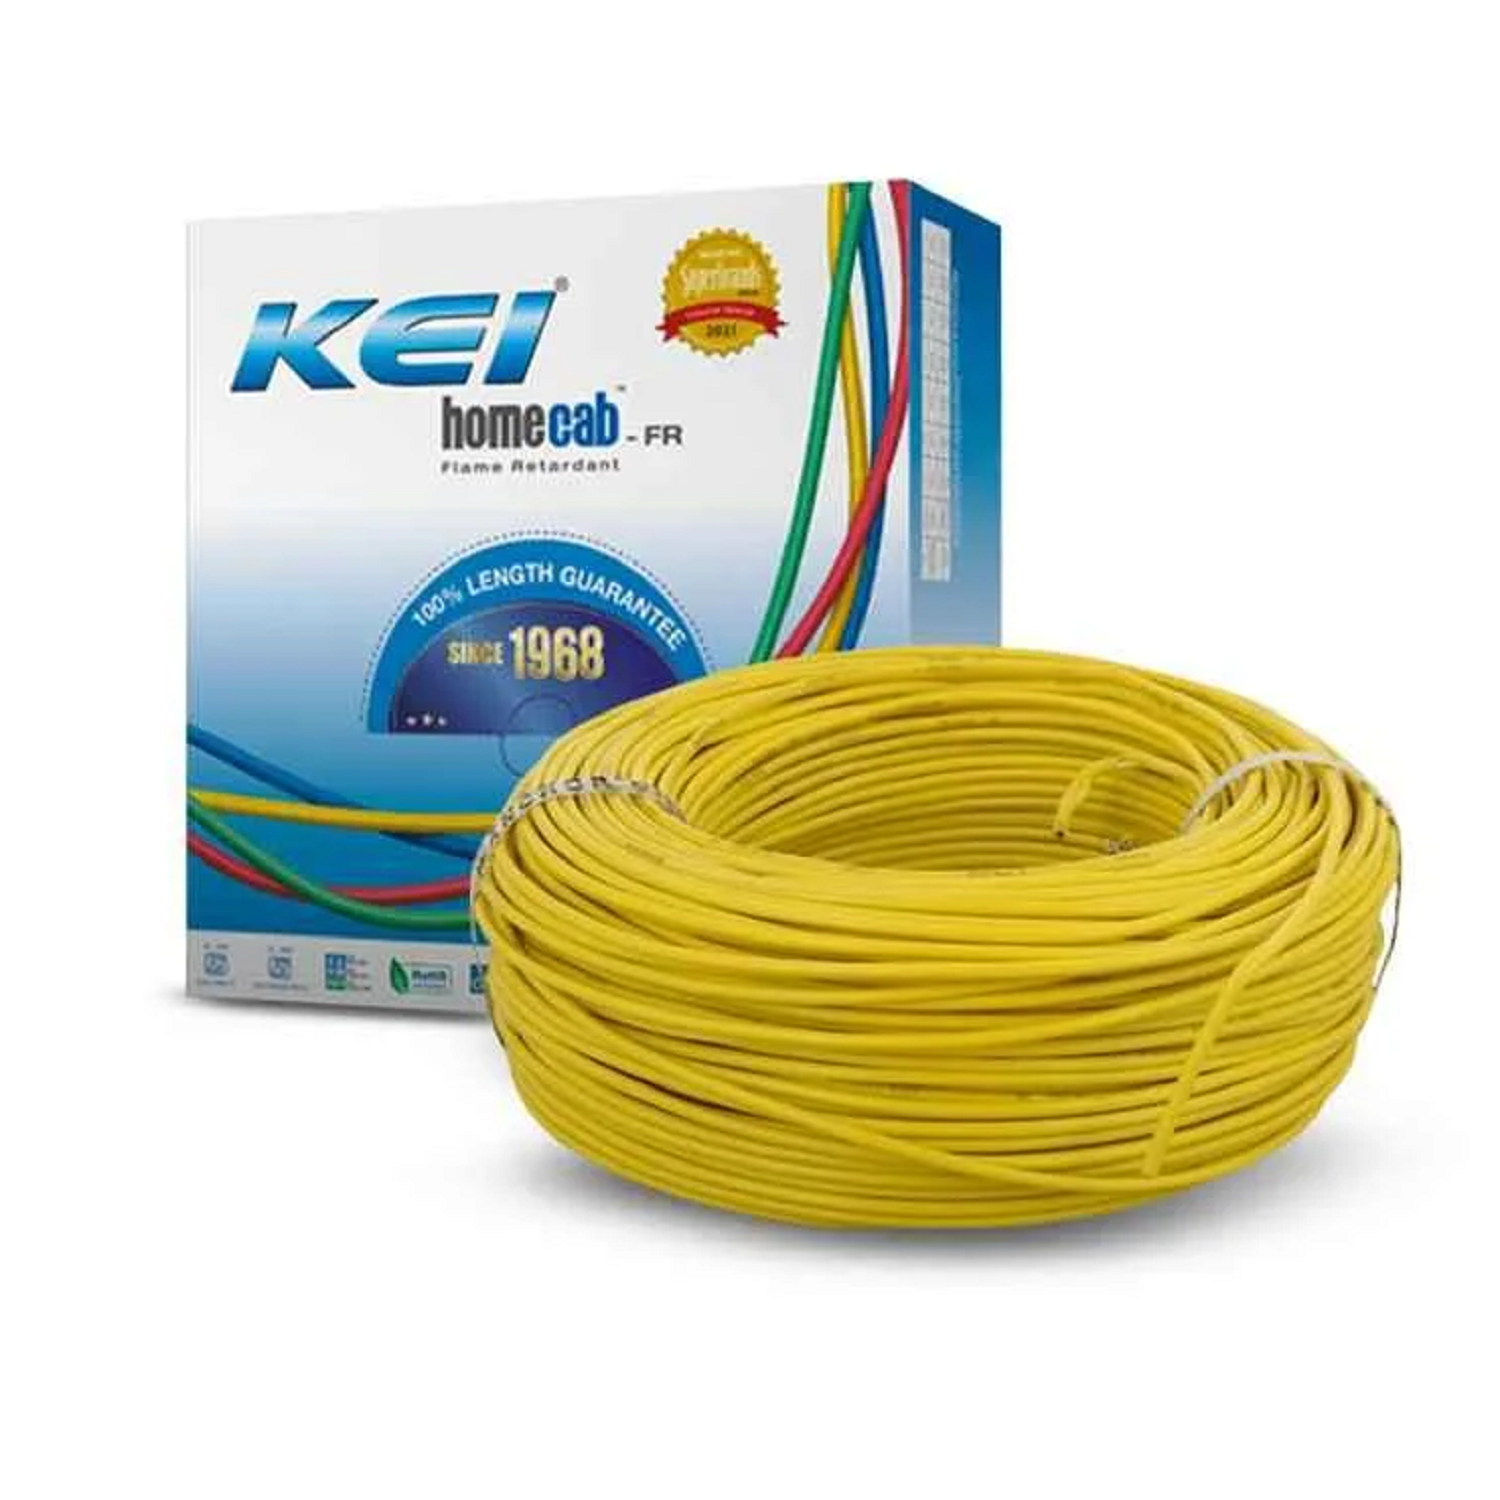 2.5 Sqmm KEI FR Single Core Copper Wire (90 Mtr) With PVC Insulated for House 38 Industrial Uses (Ye